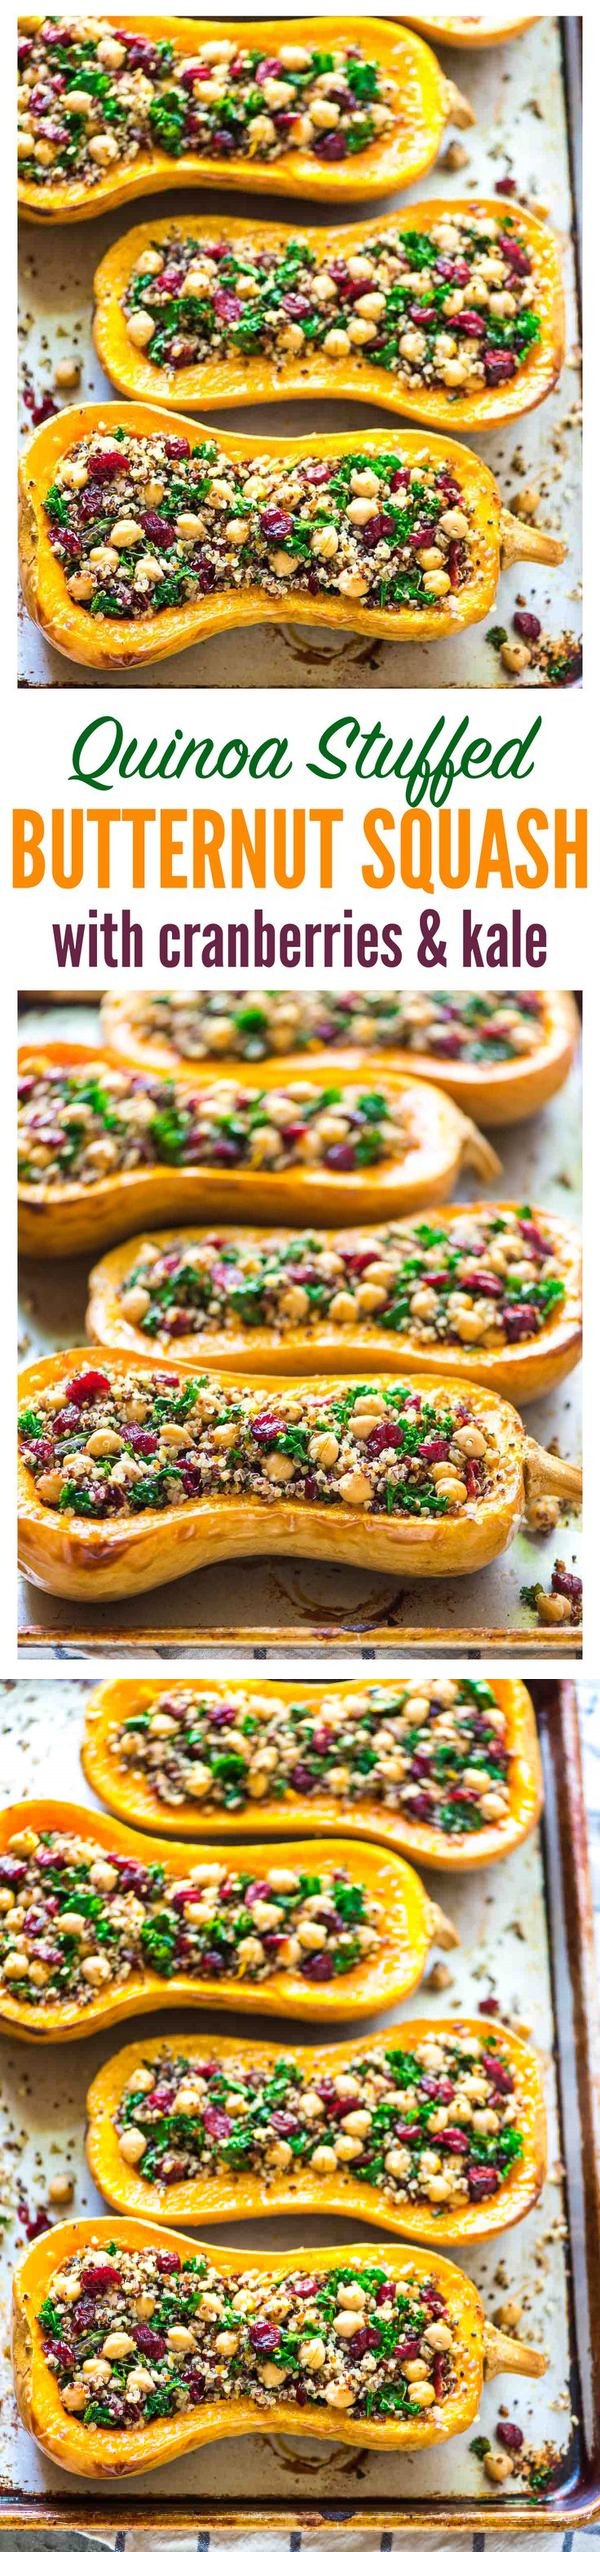 Stuffed Butternut Squash with Quinoa, Kale, Cranberries, and Chickpeas